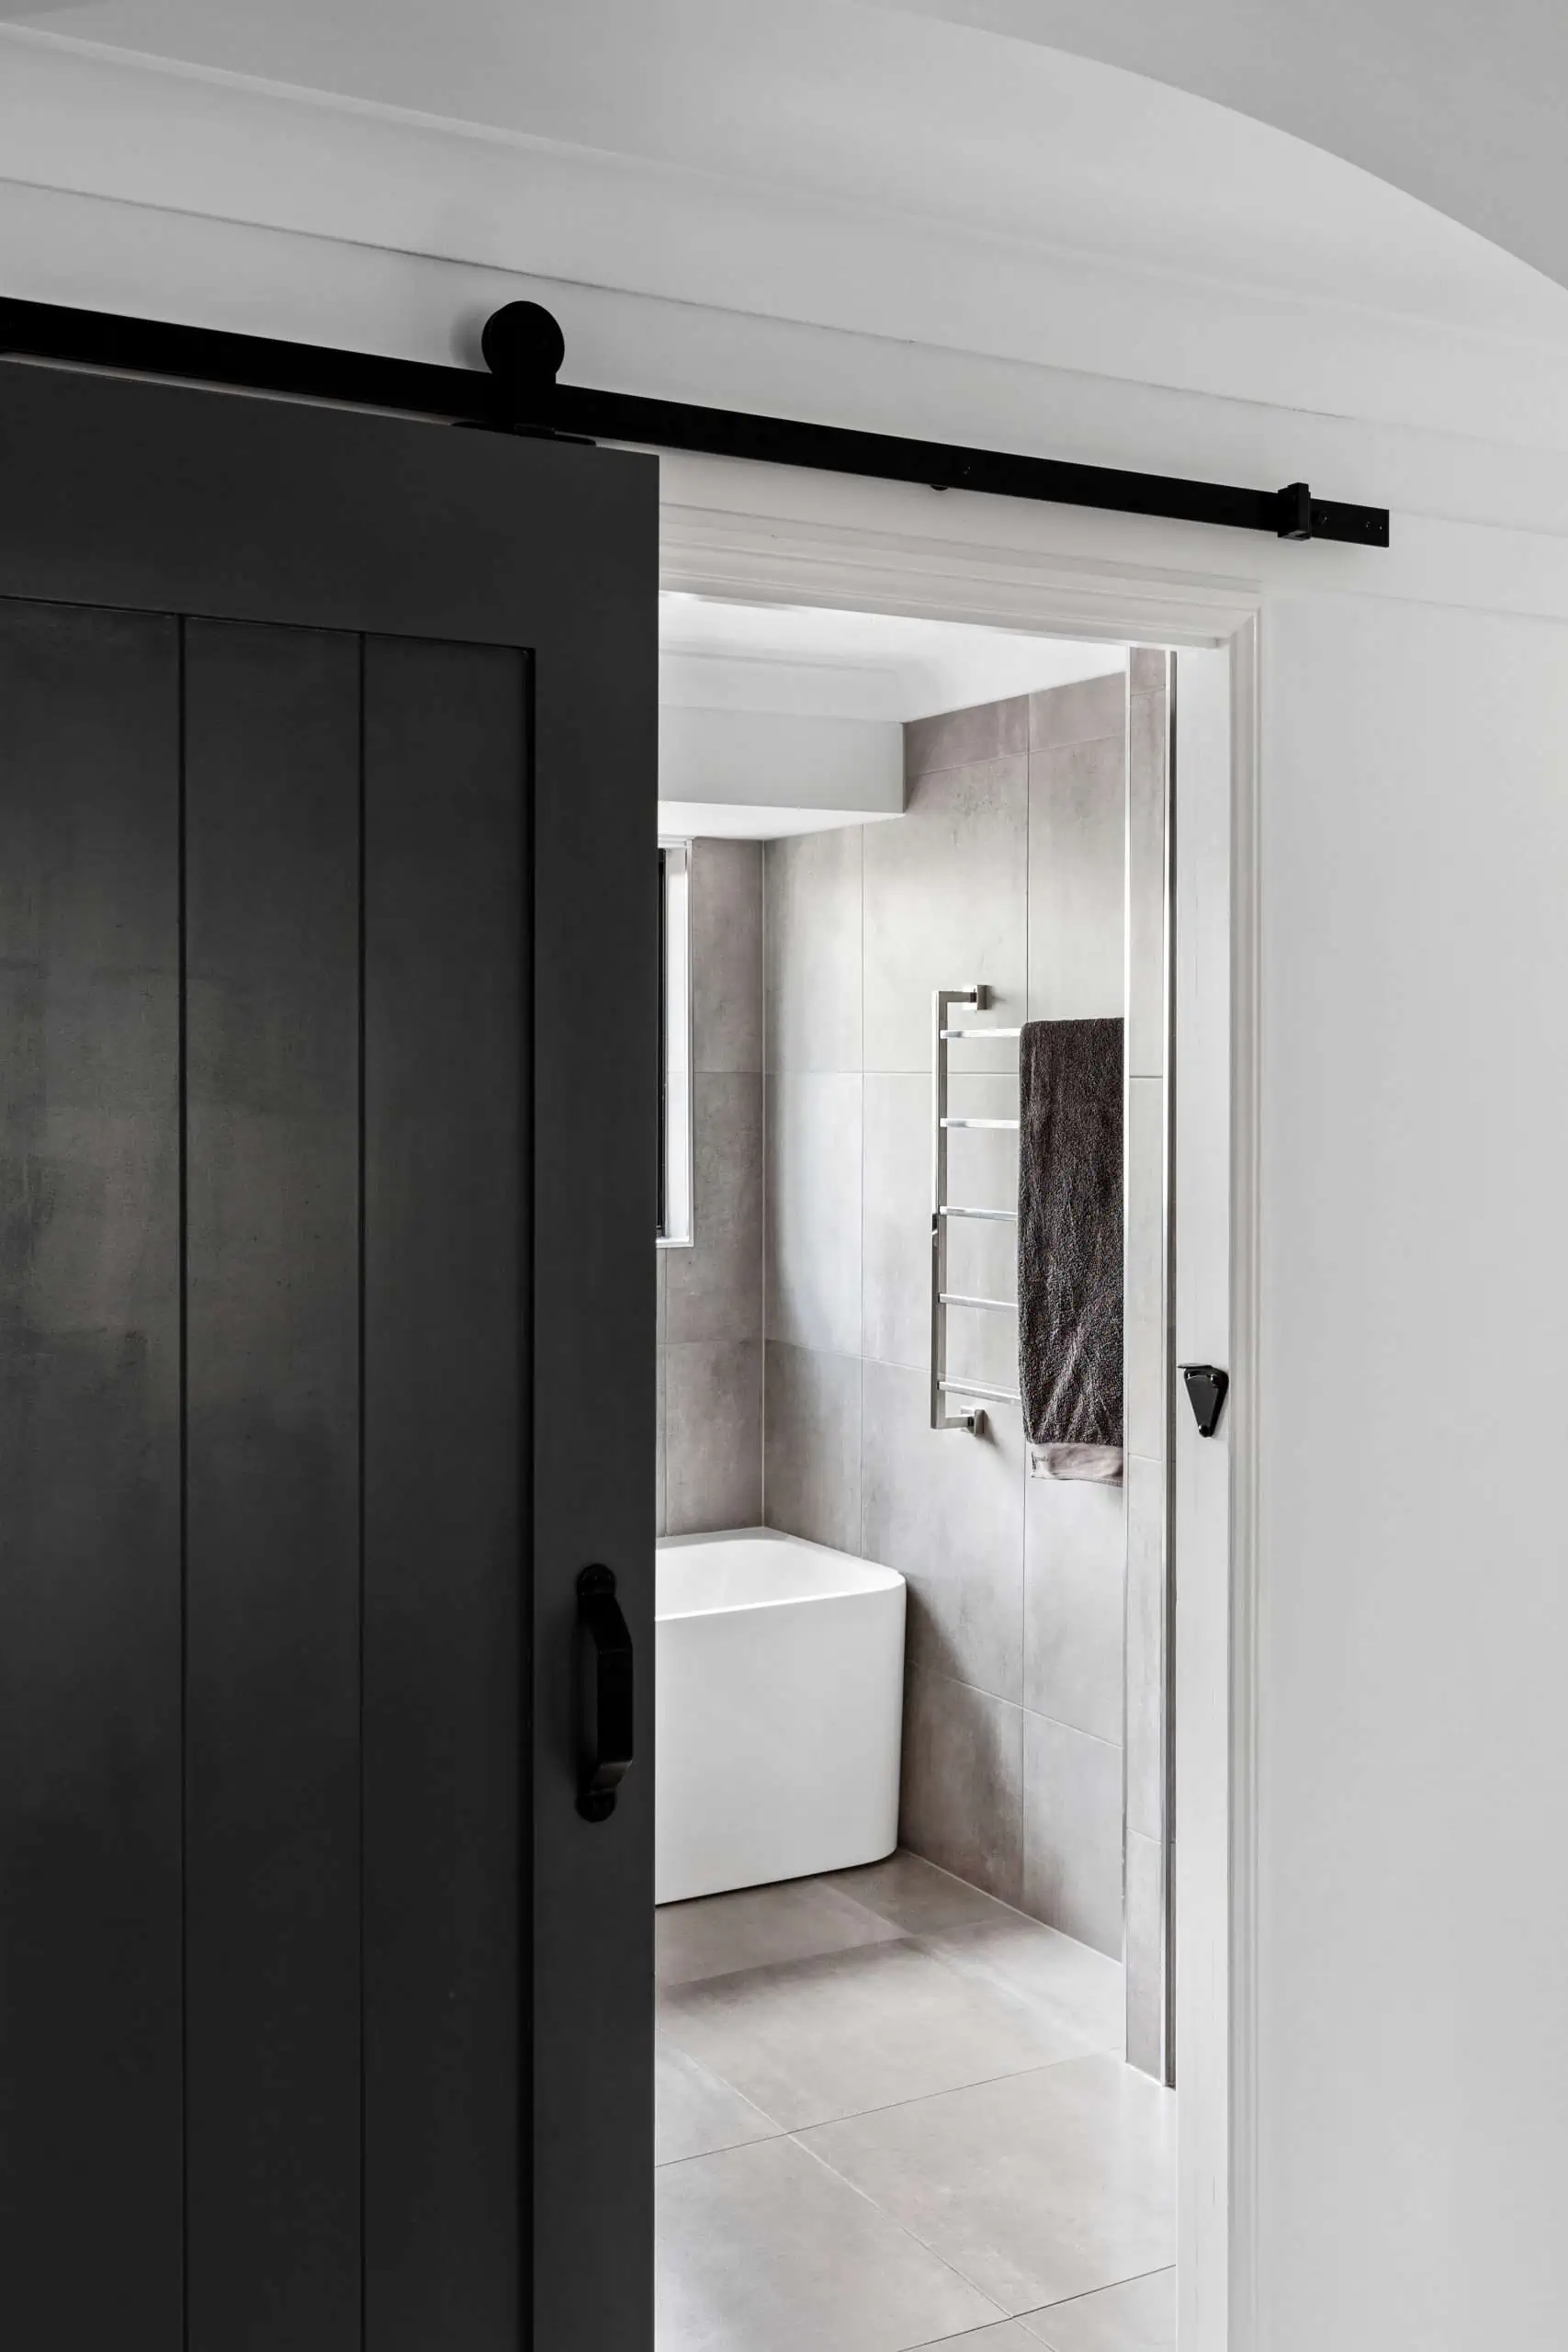 Dark sliding door opening to reveal a modern bathroom with chrome details